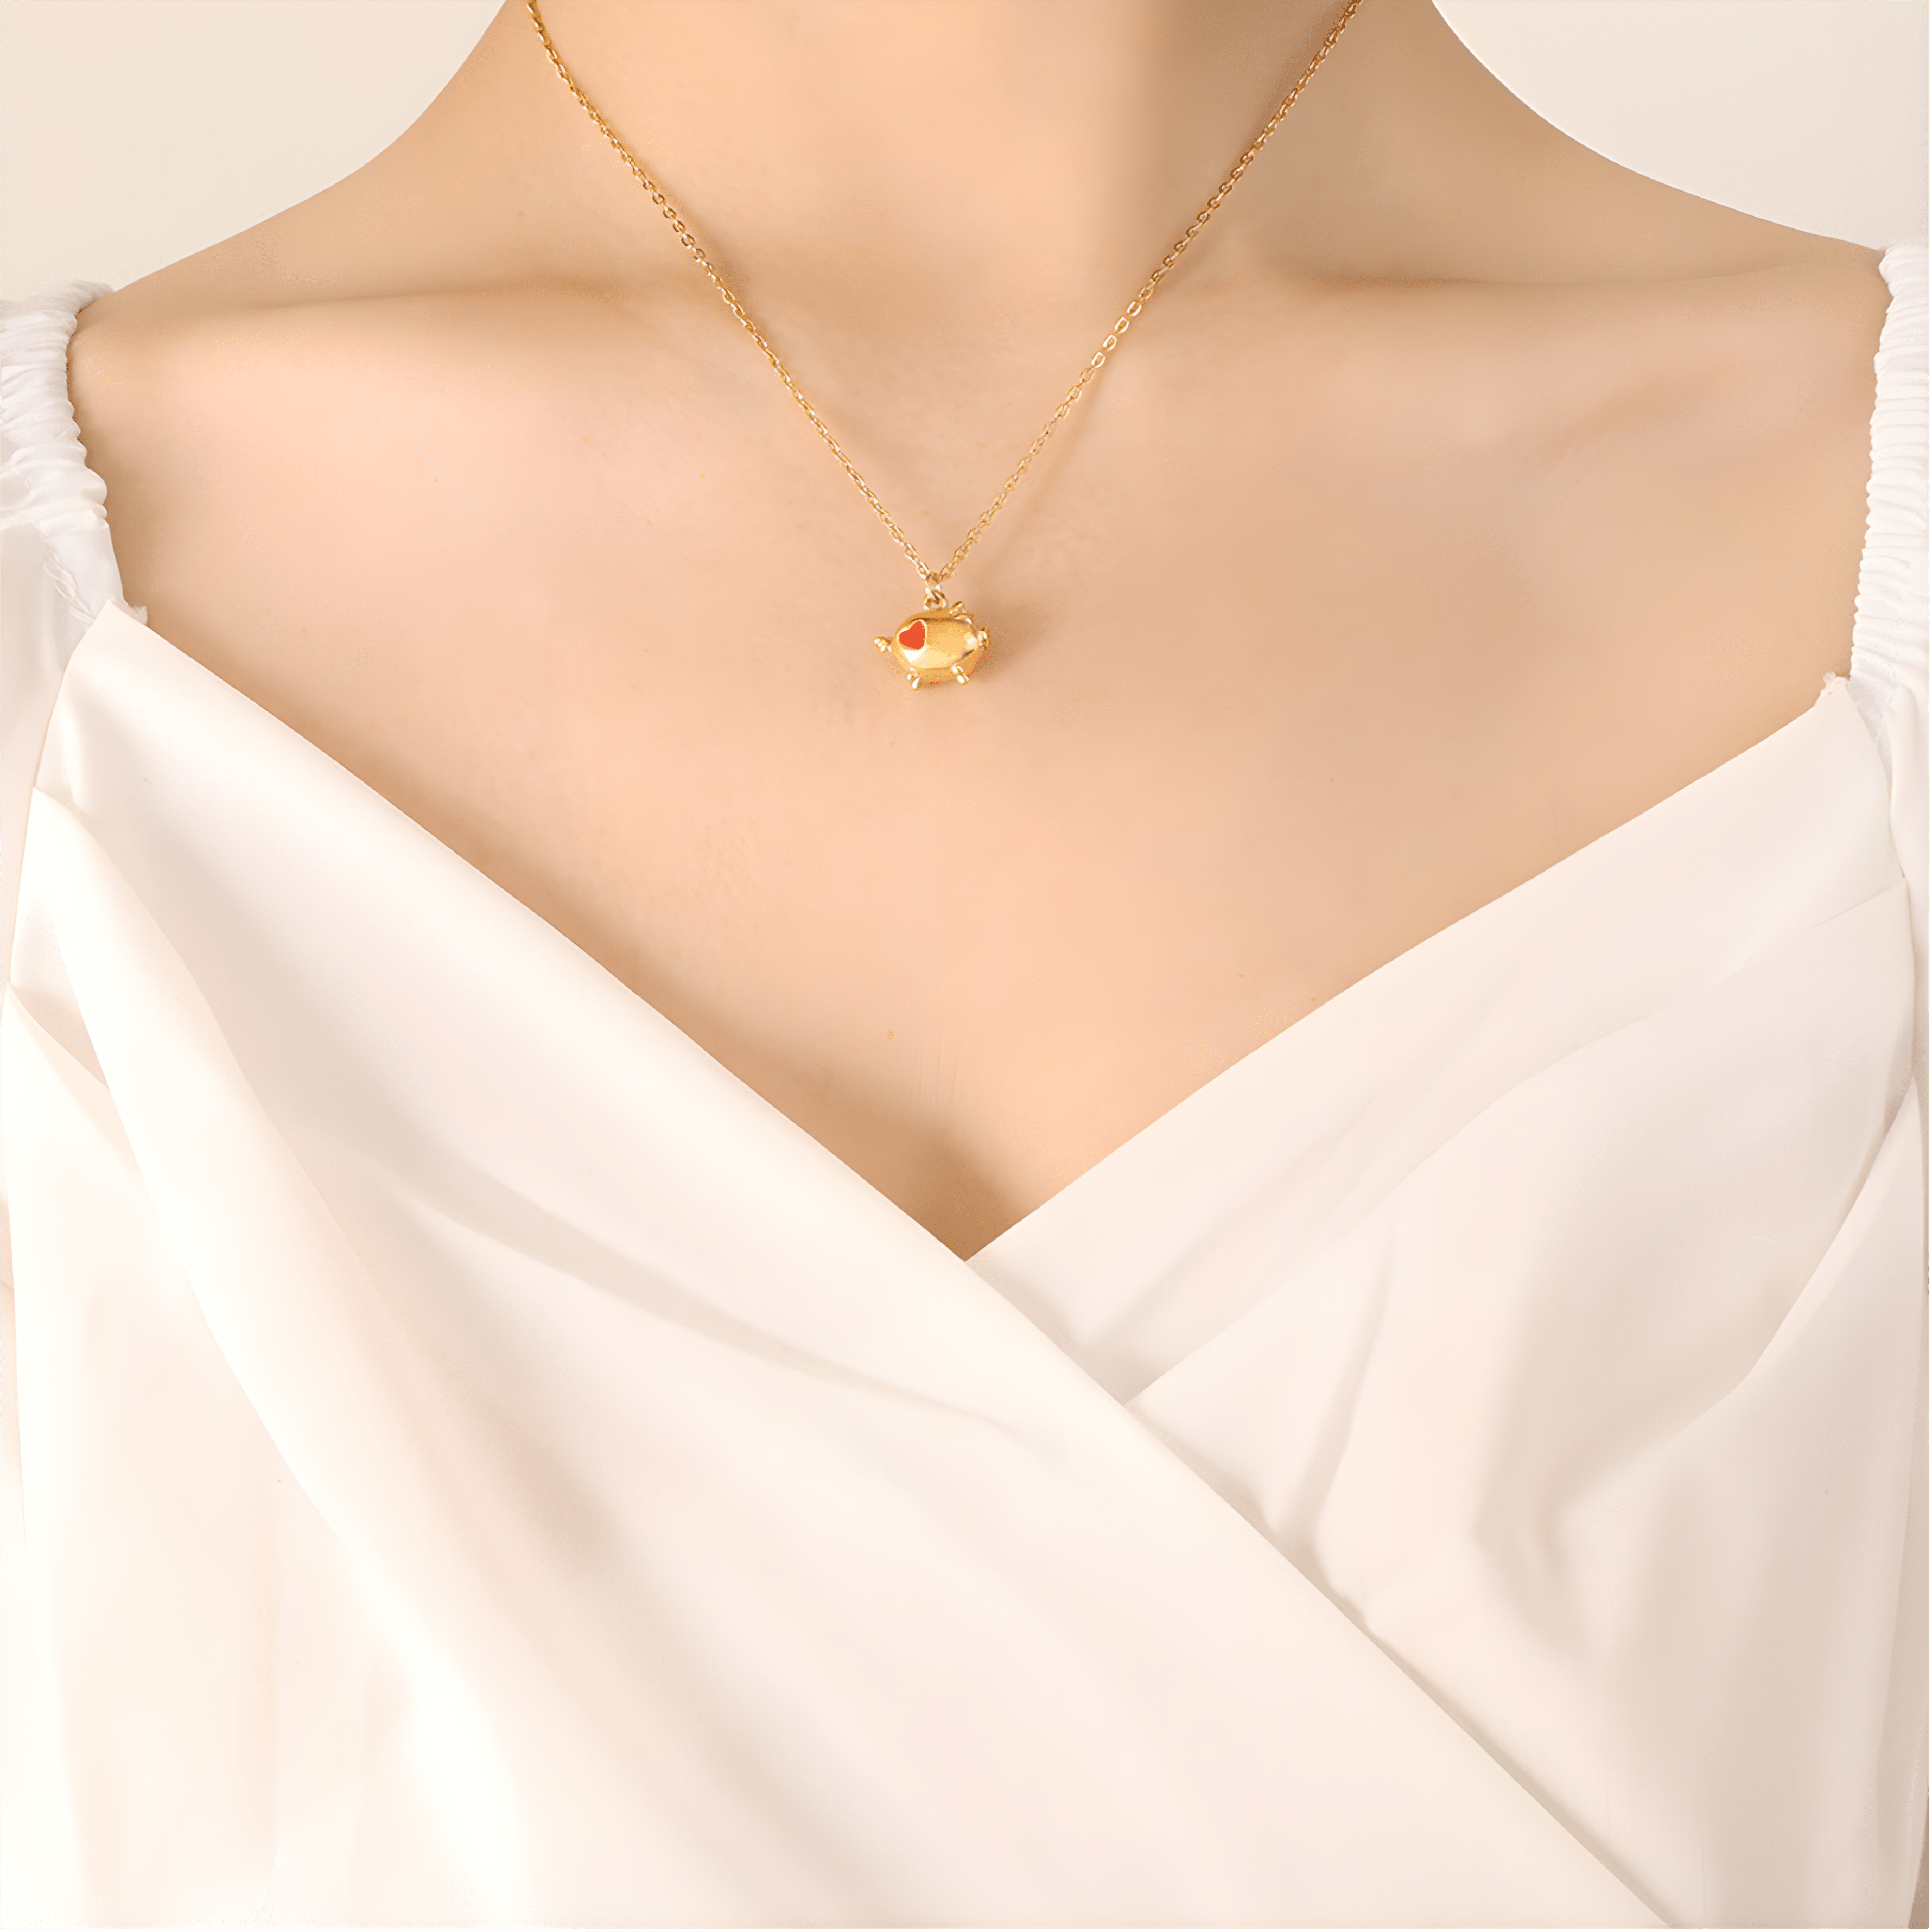 Small Gold Necklace - Etsy New Zealand